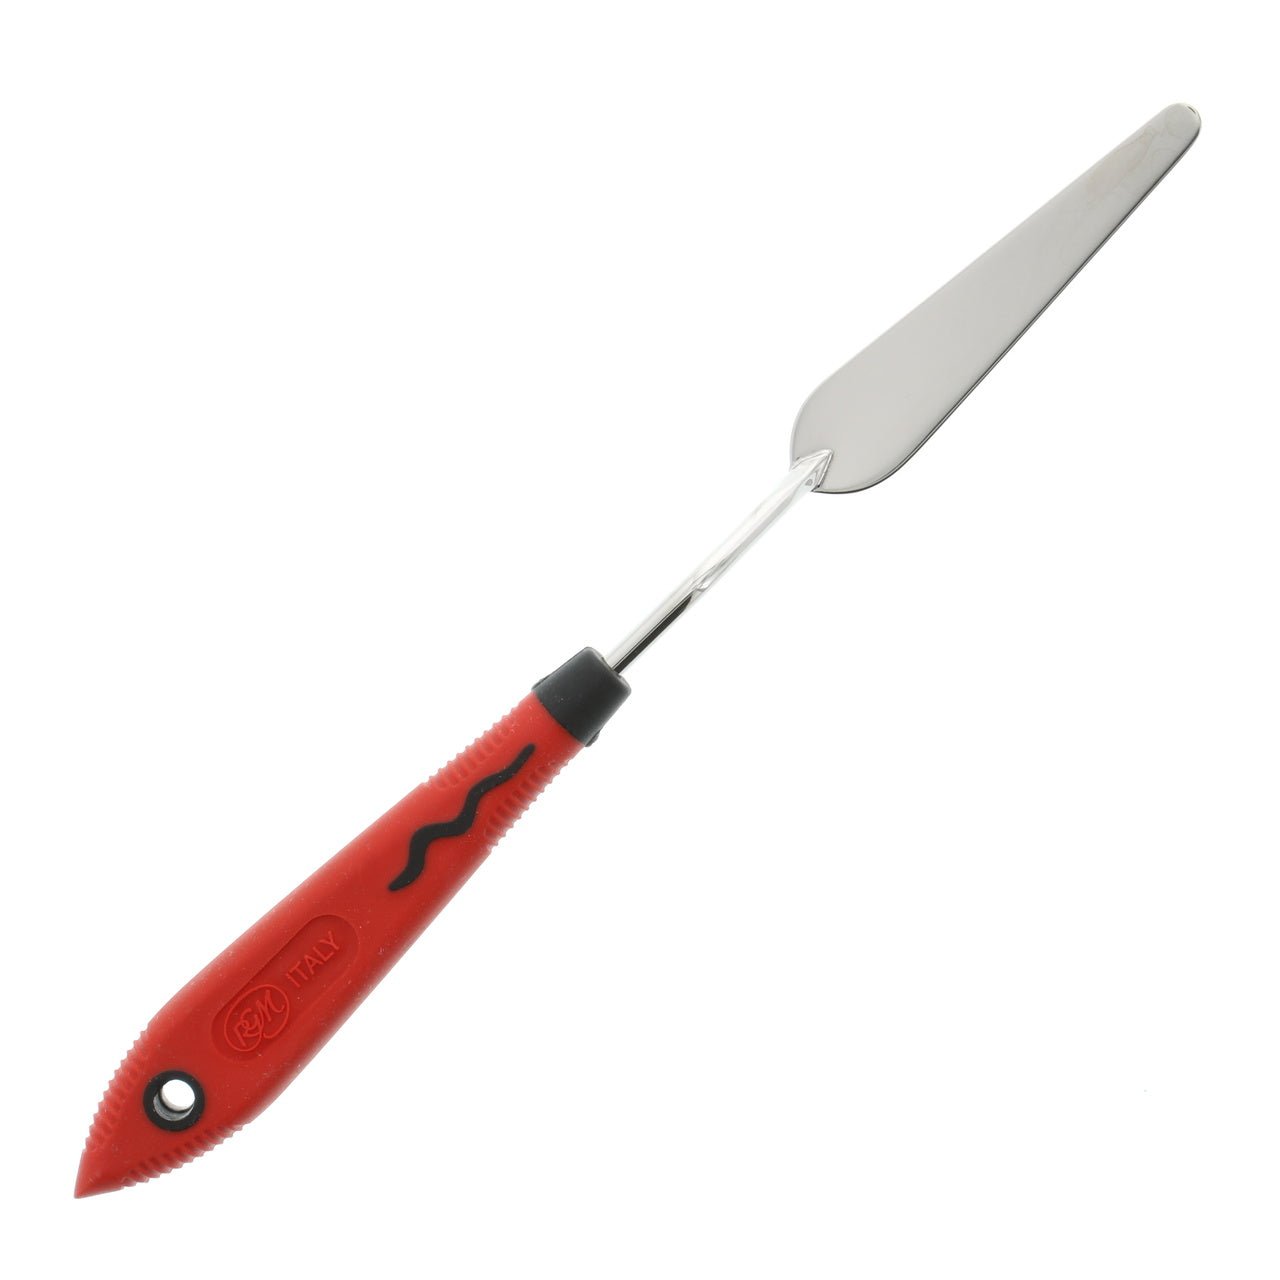 RGM Soft Grip Painting Knife #014 (Red Handle)